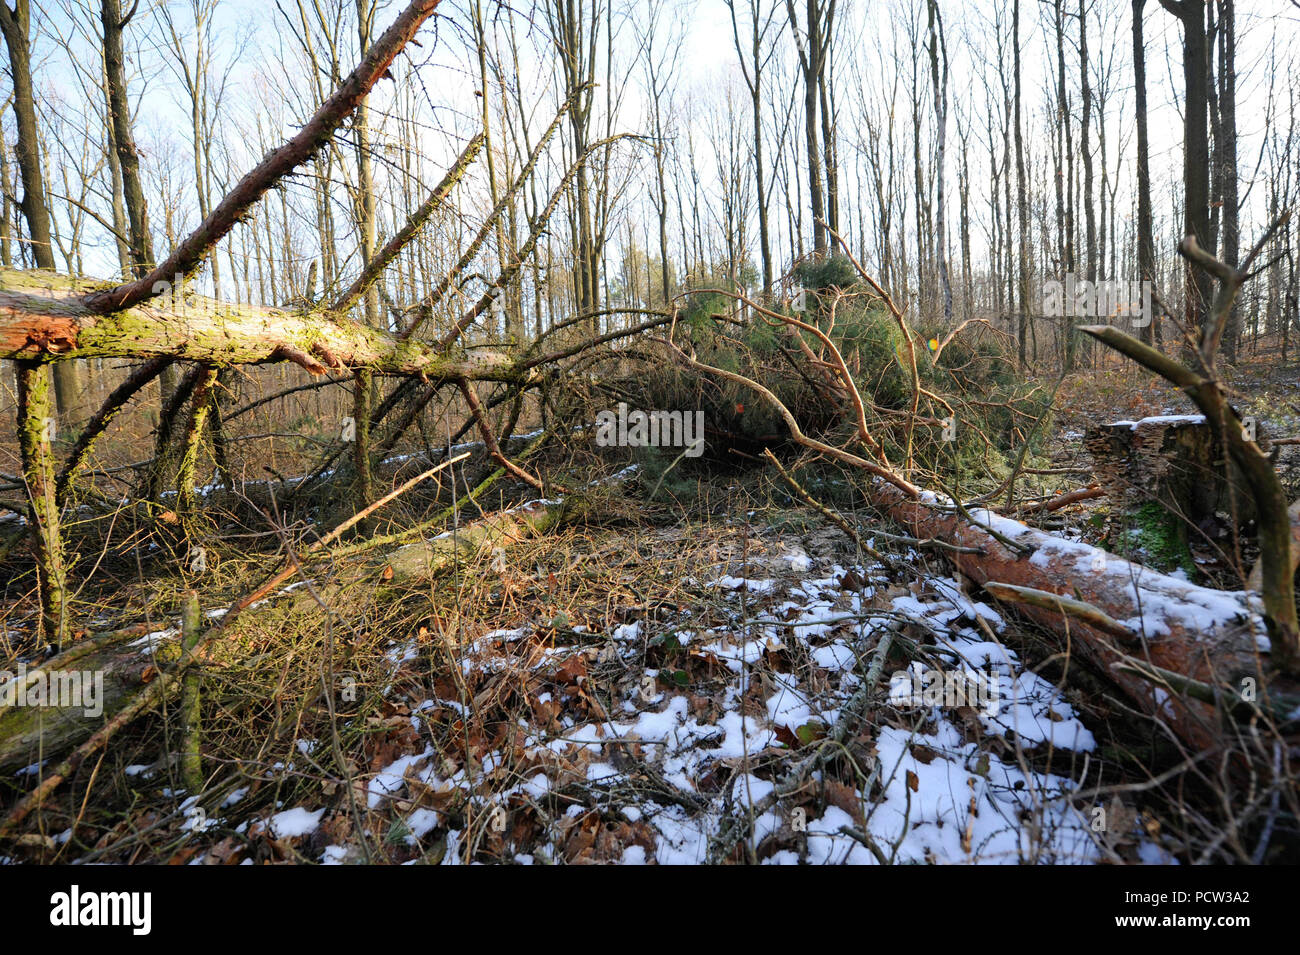 Sturm 'Friederike' swept over Saxony at the end of January 2018 in hurricane force and left heavy damage in the forests of Saxony across fallen trees Stock Photo